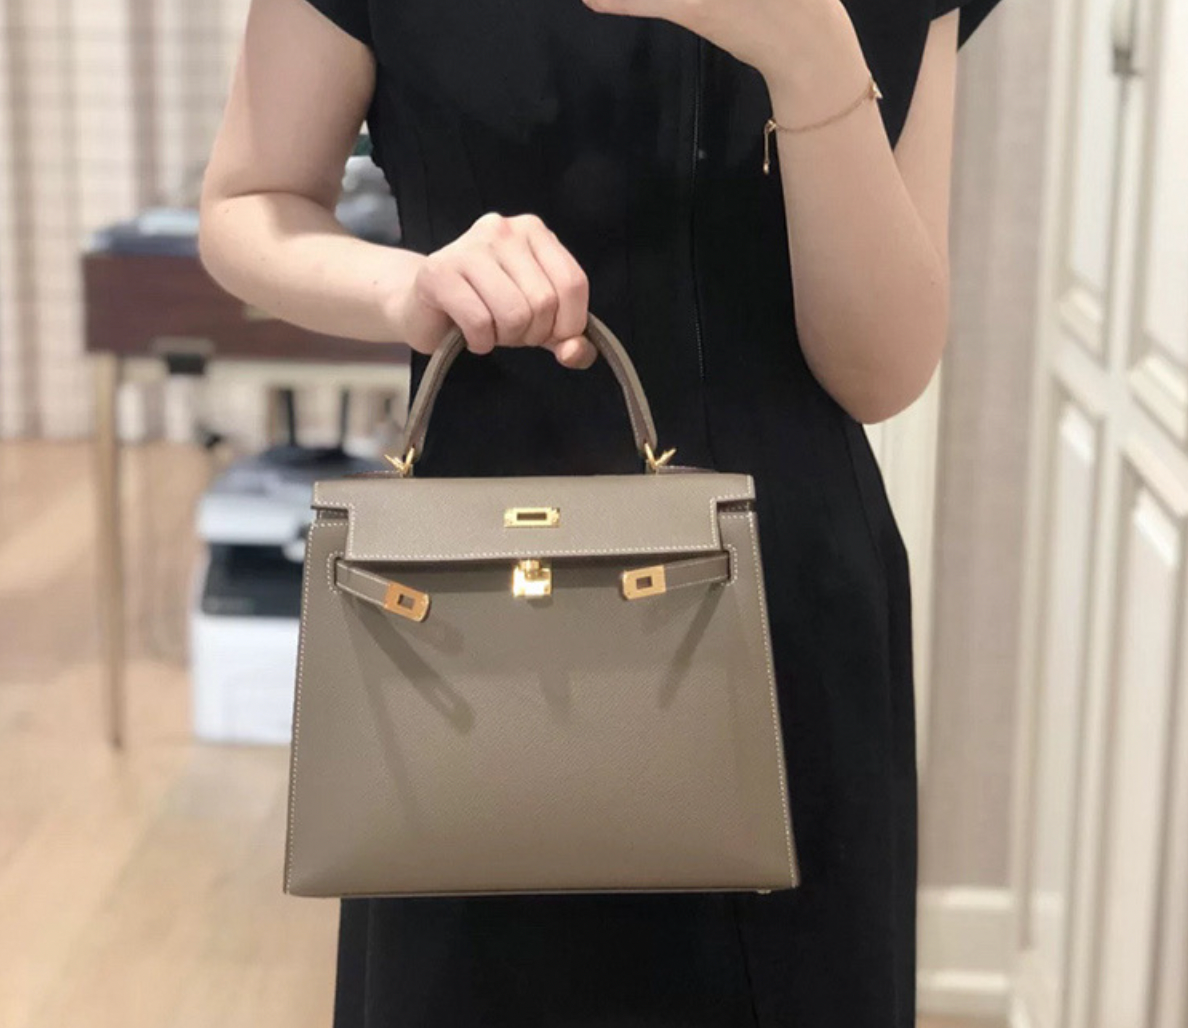 new trendy mini women's bag leather bag hand-held palm grain cowhide second-generation Kelly bag one shoulder messenger small bag